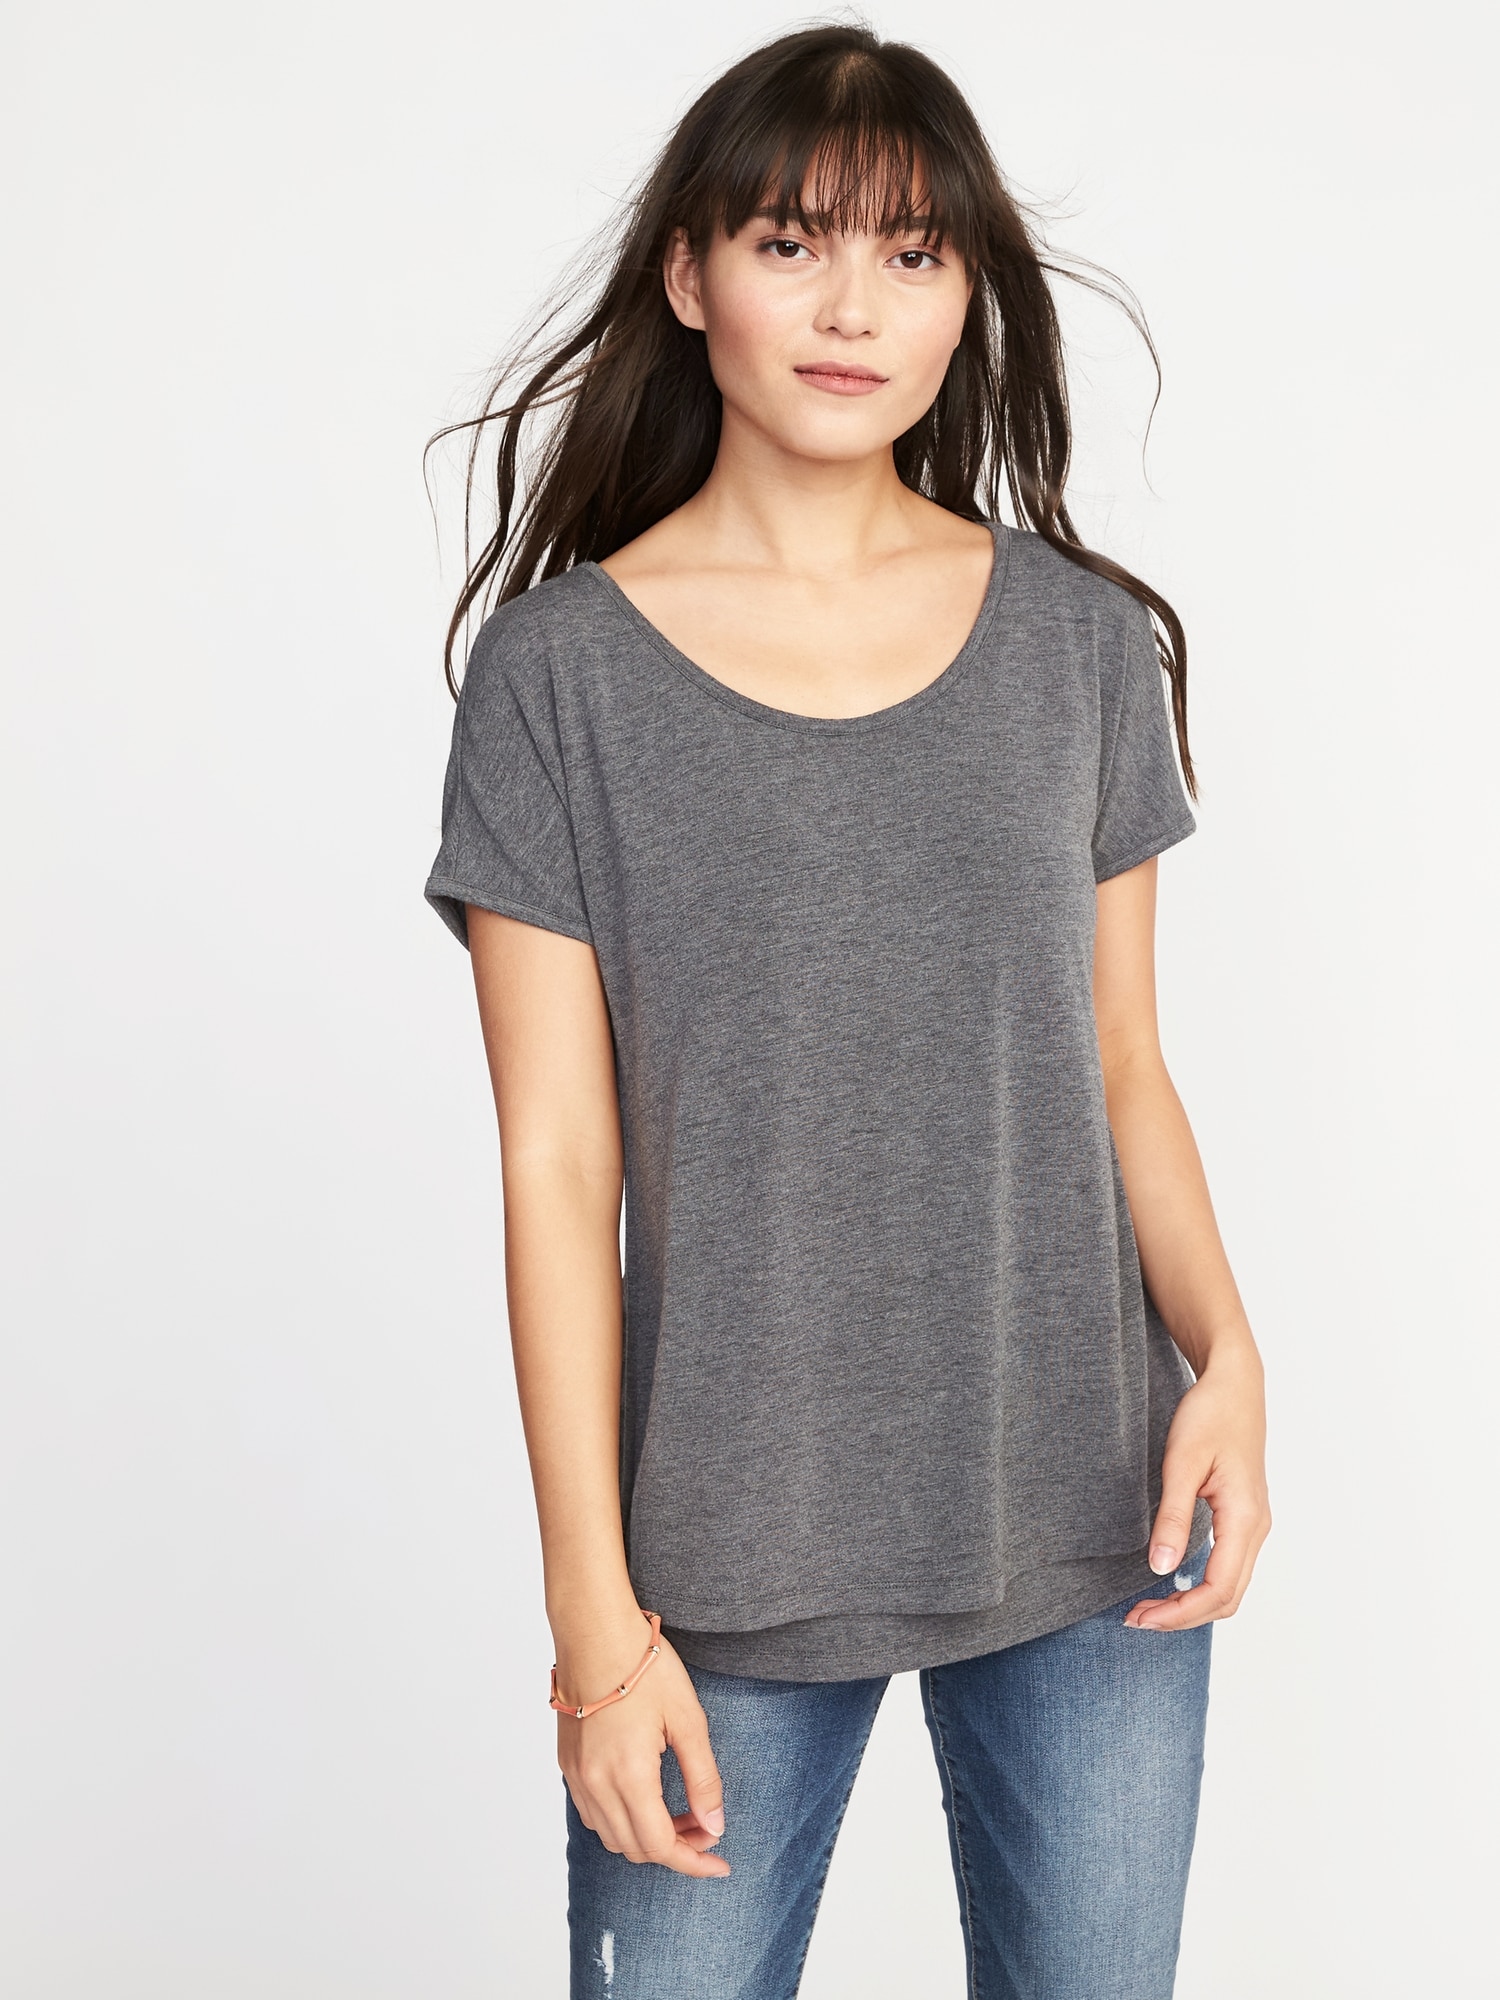 Maternity Double-Layer Nursing Top | Old Navy